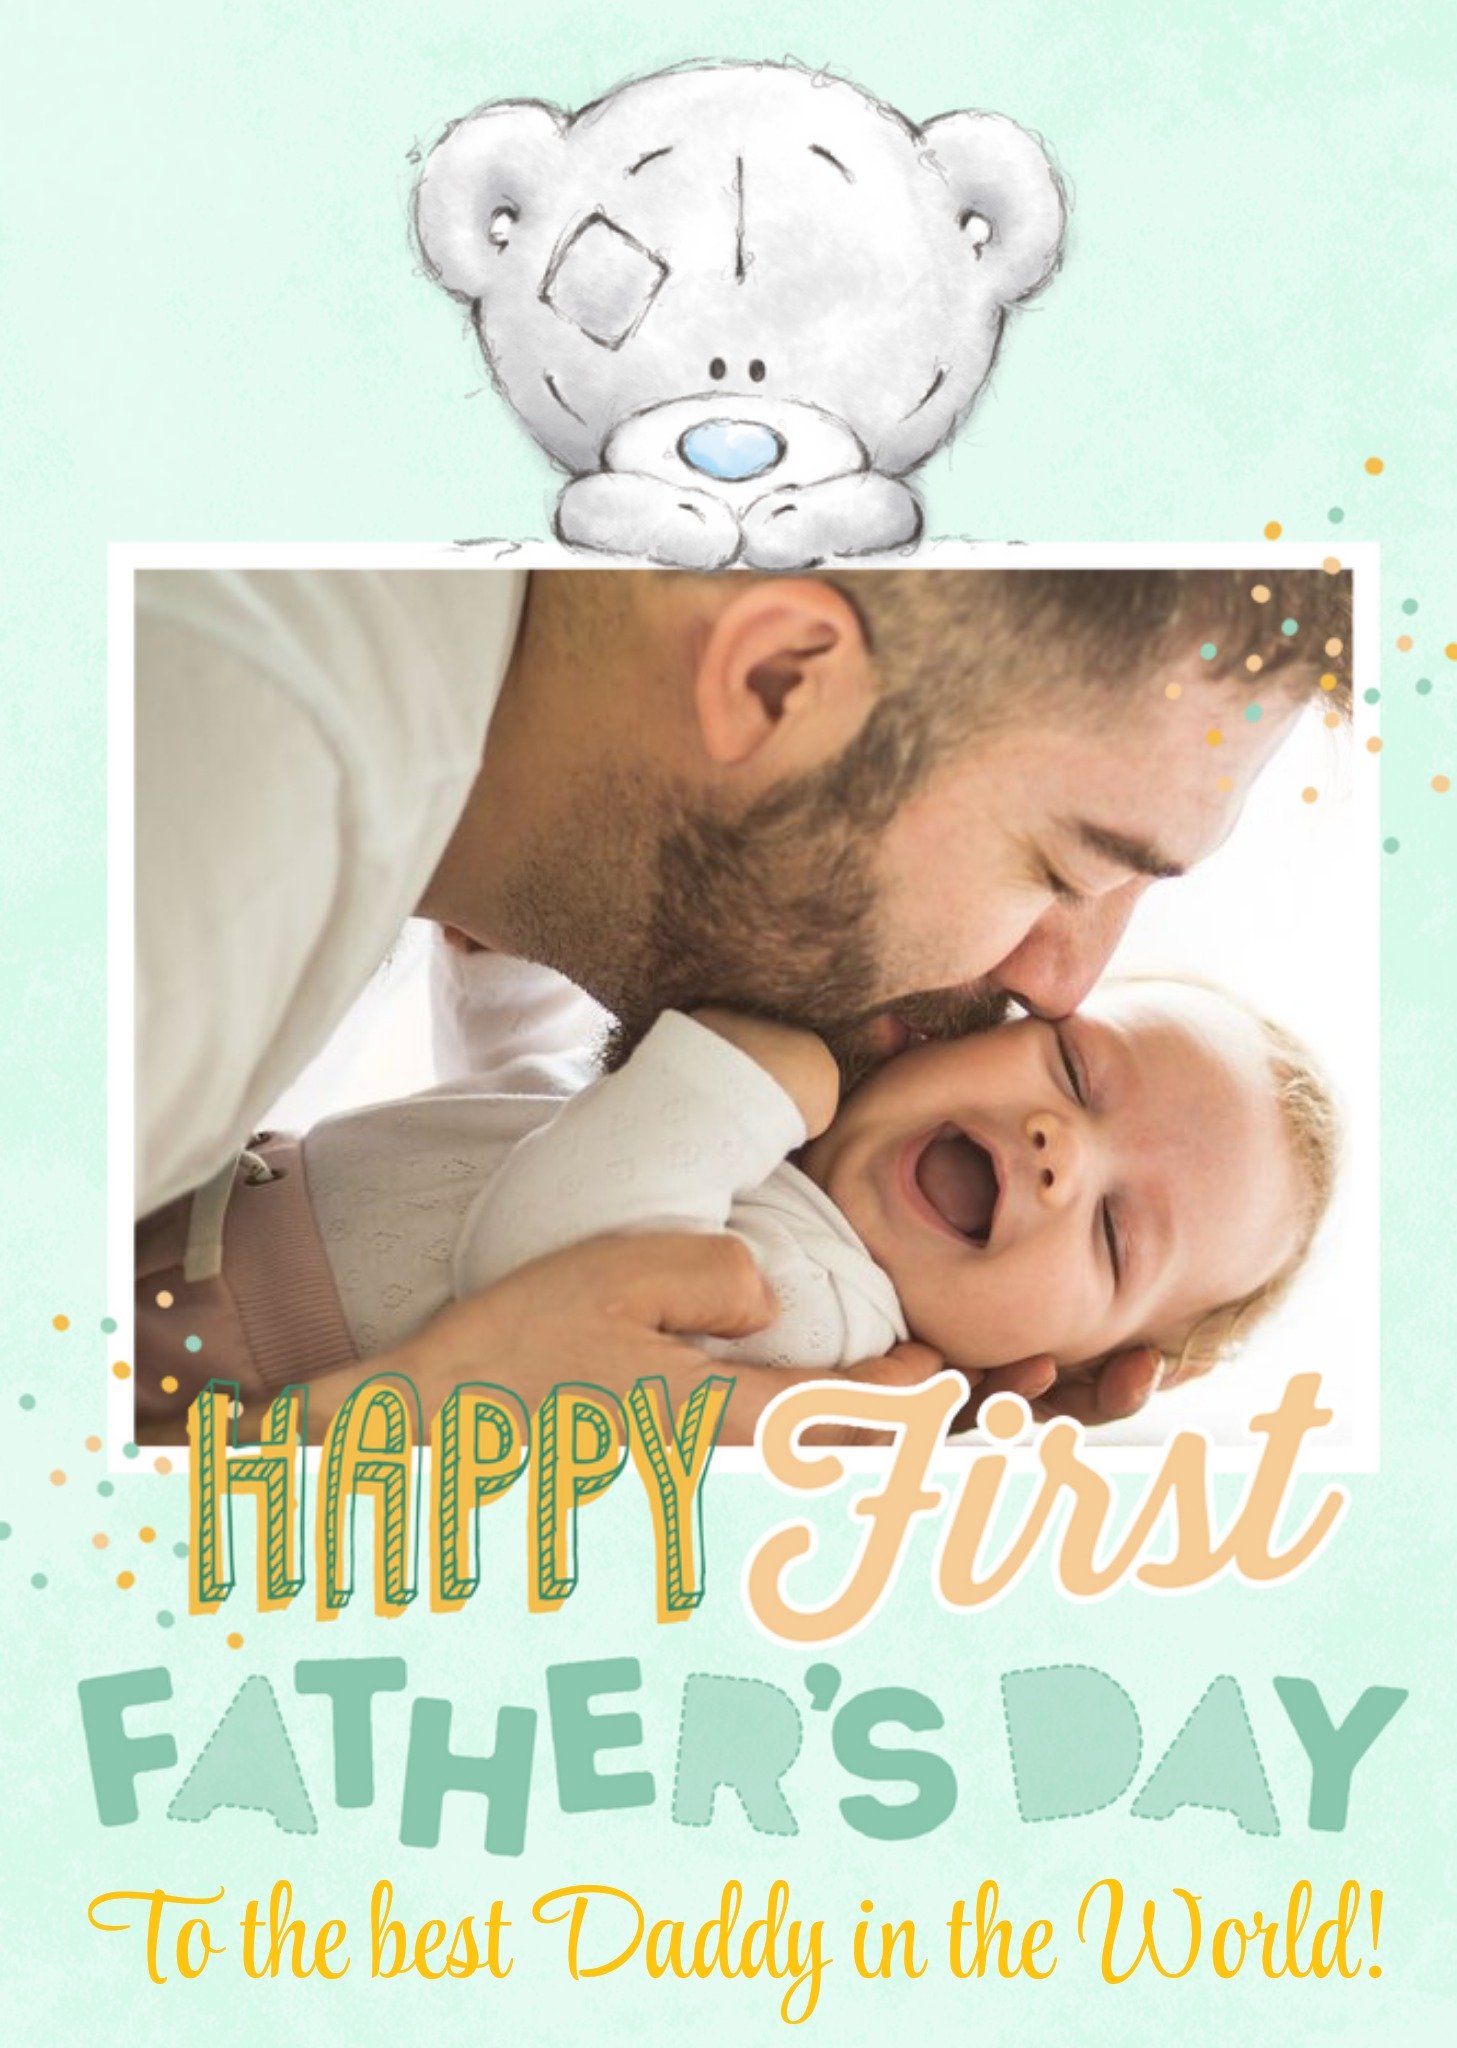 Me To You Tatty Teddy To The Best Daddy Happy First Father's Day Photo Card Ecard